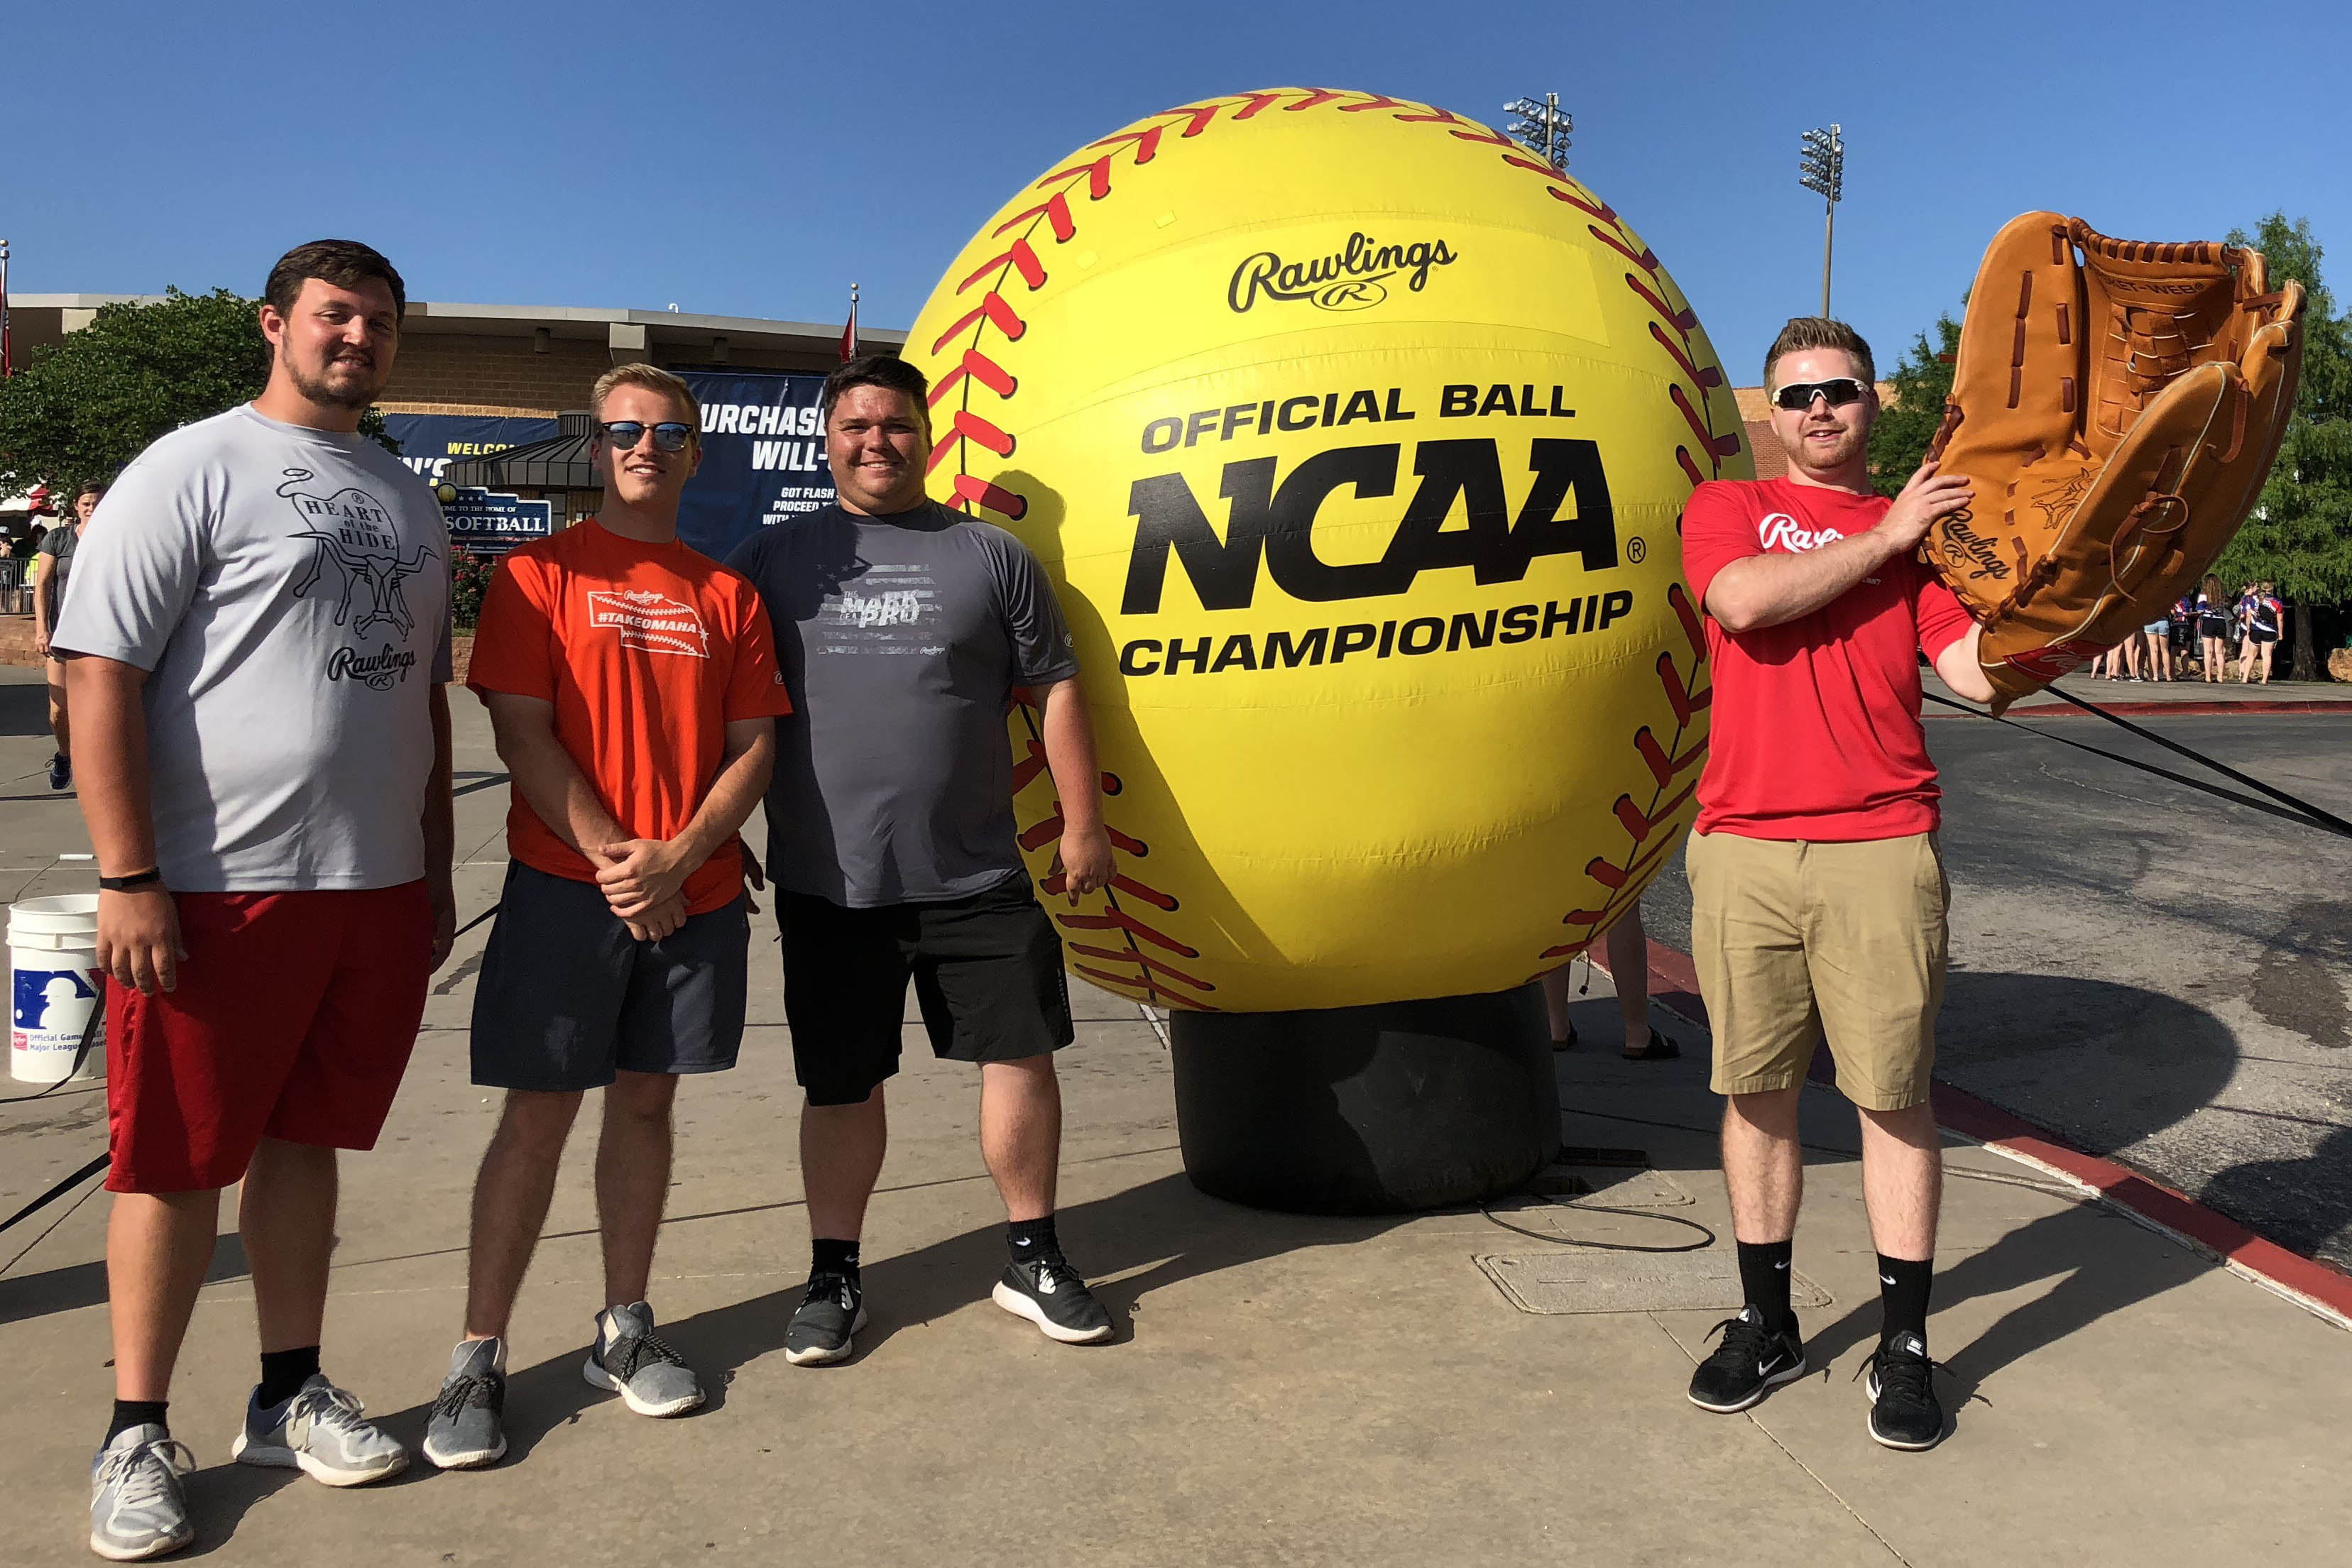 Maryville's sports management degree students travel with Rawlings as marketing interns